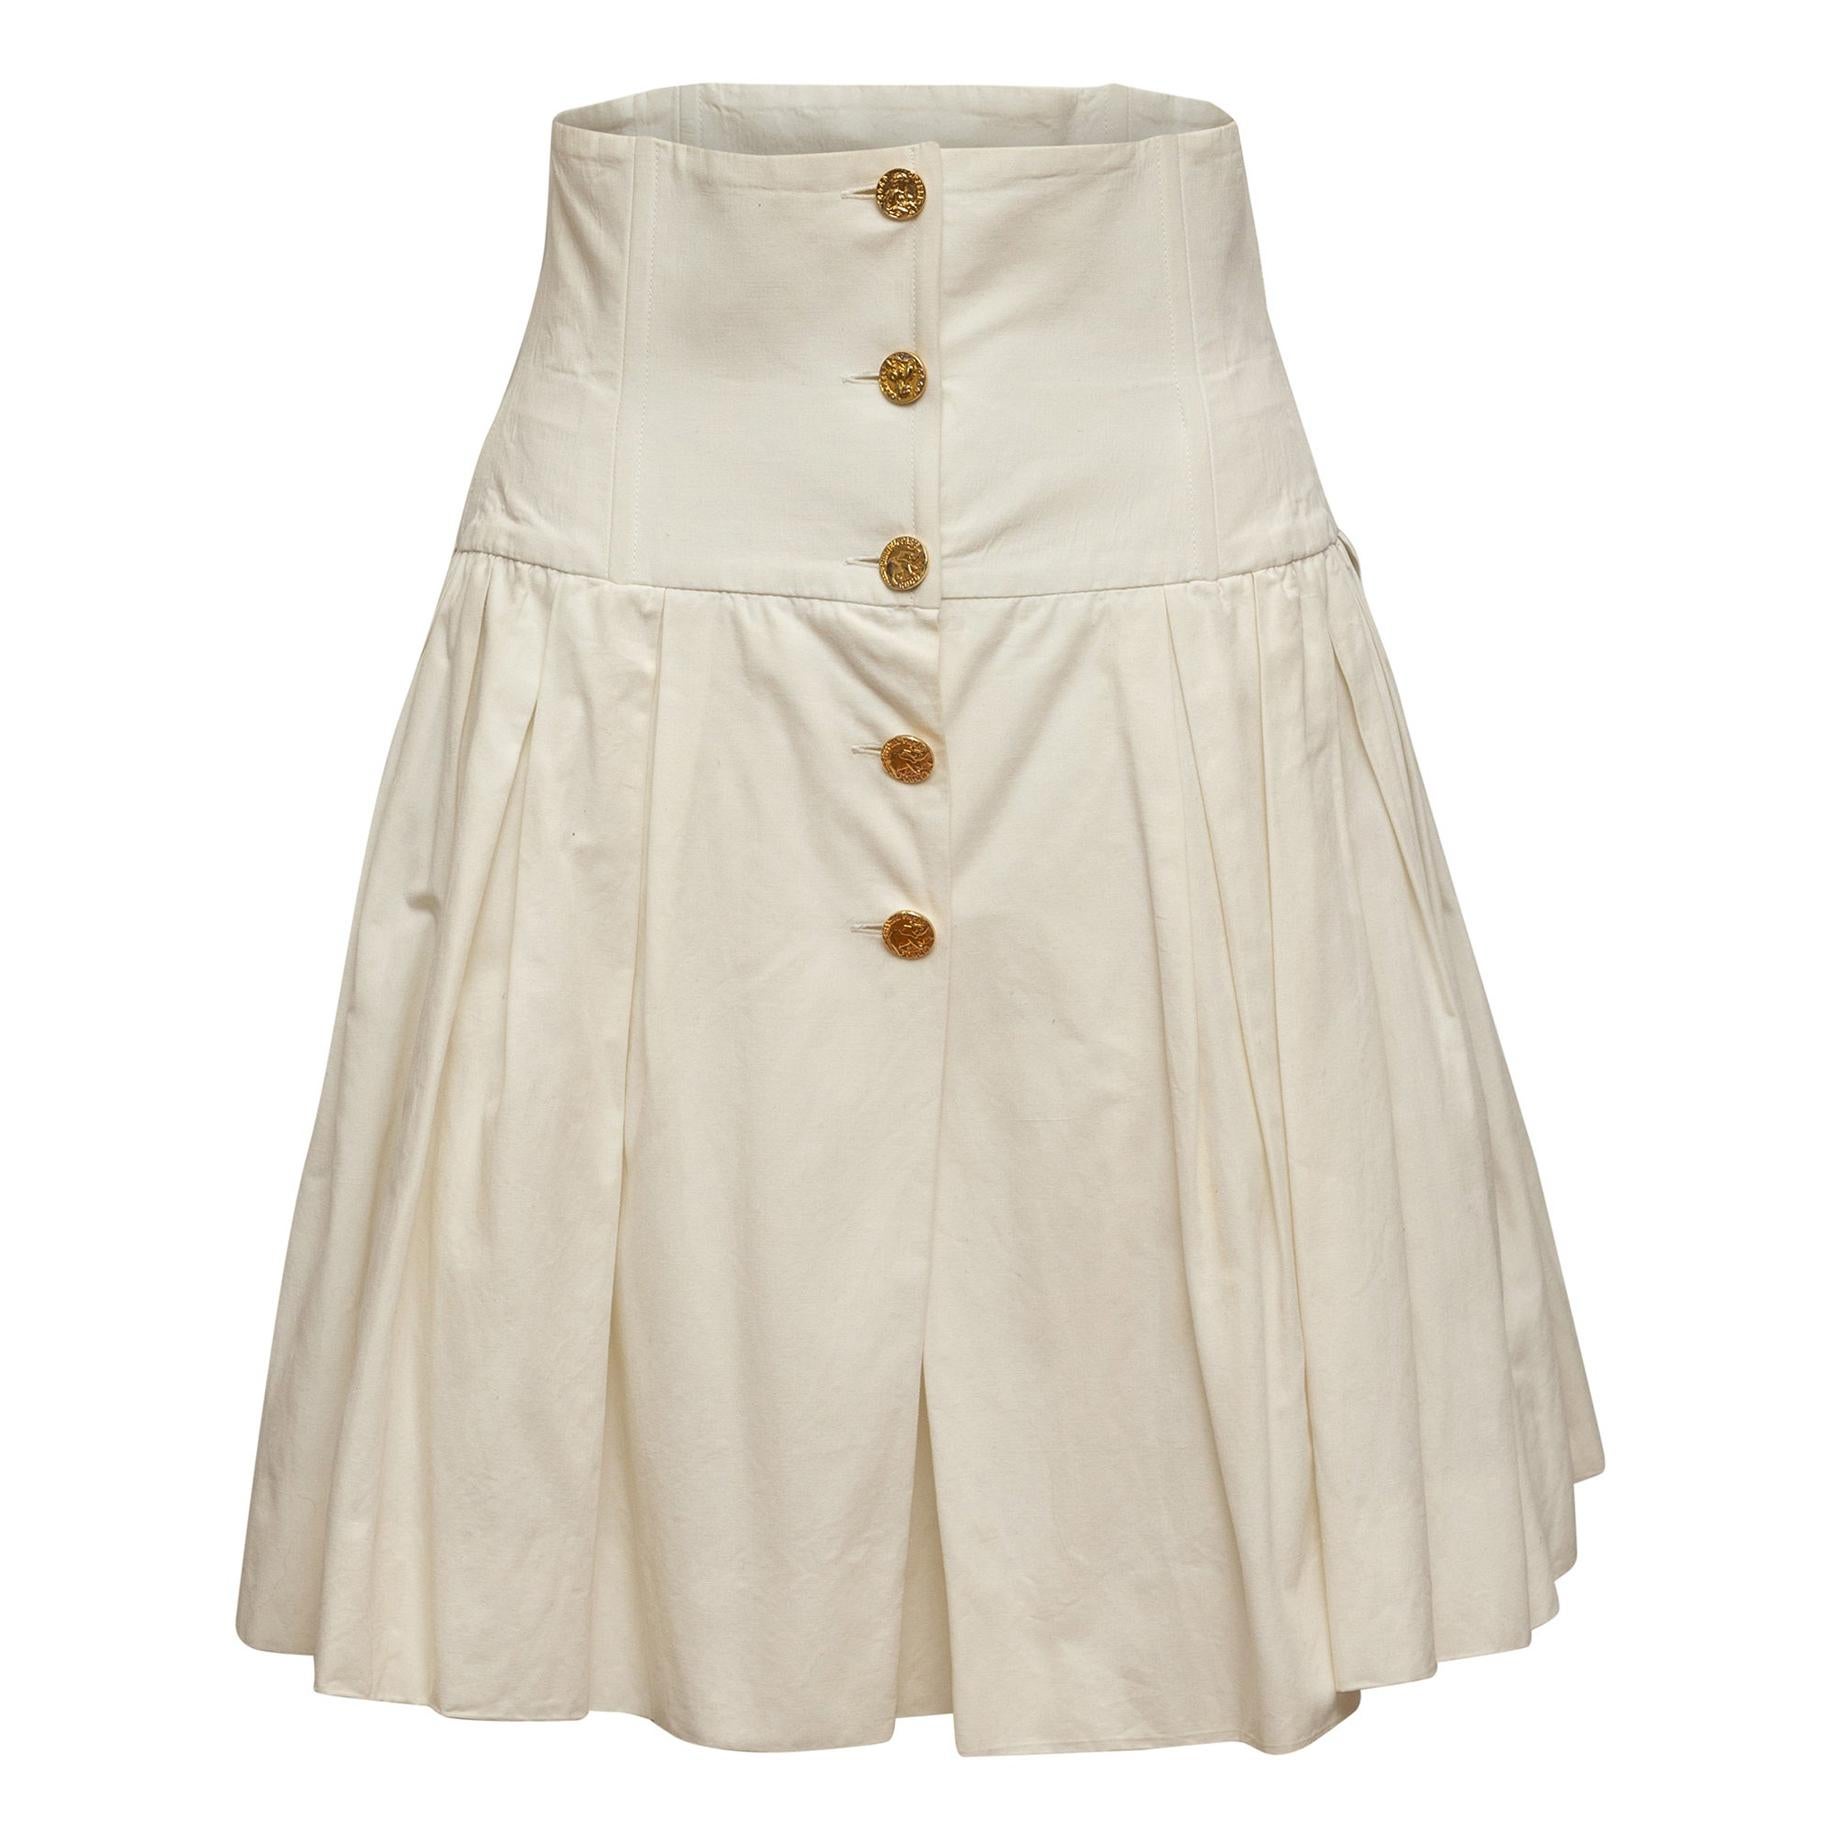 Chanel Boutique White High-Waisted Skirt